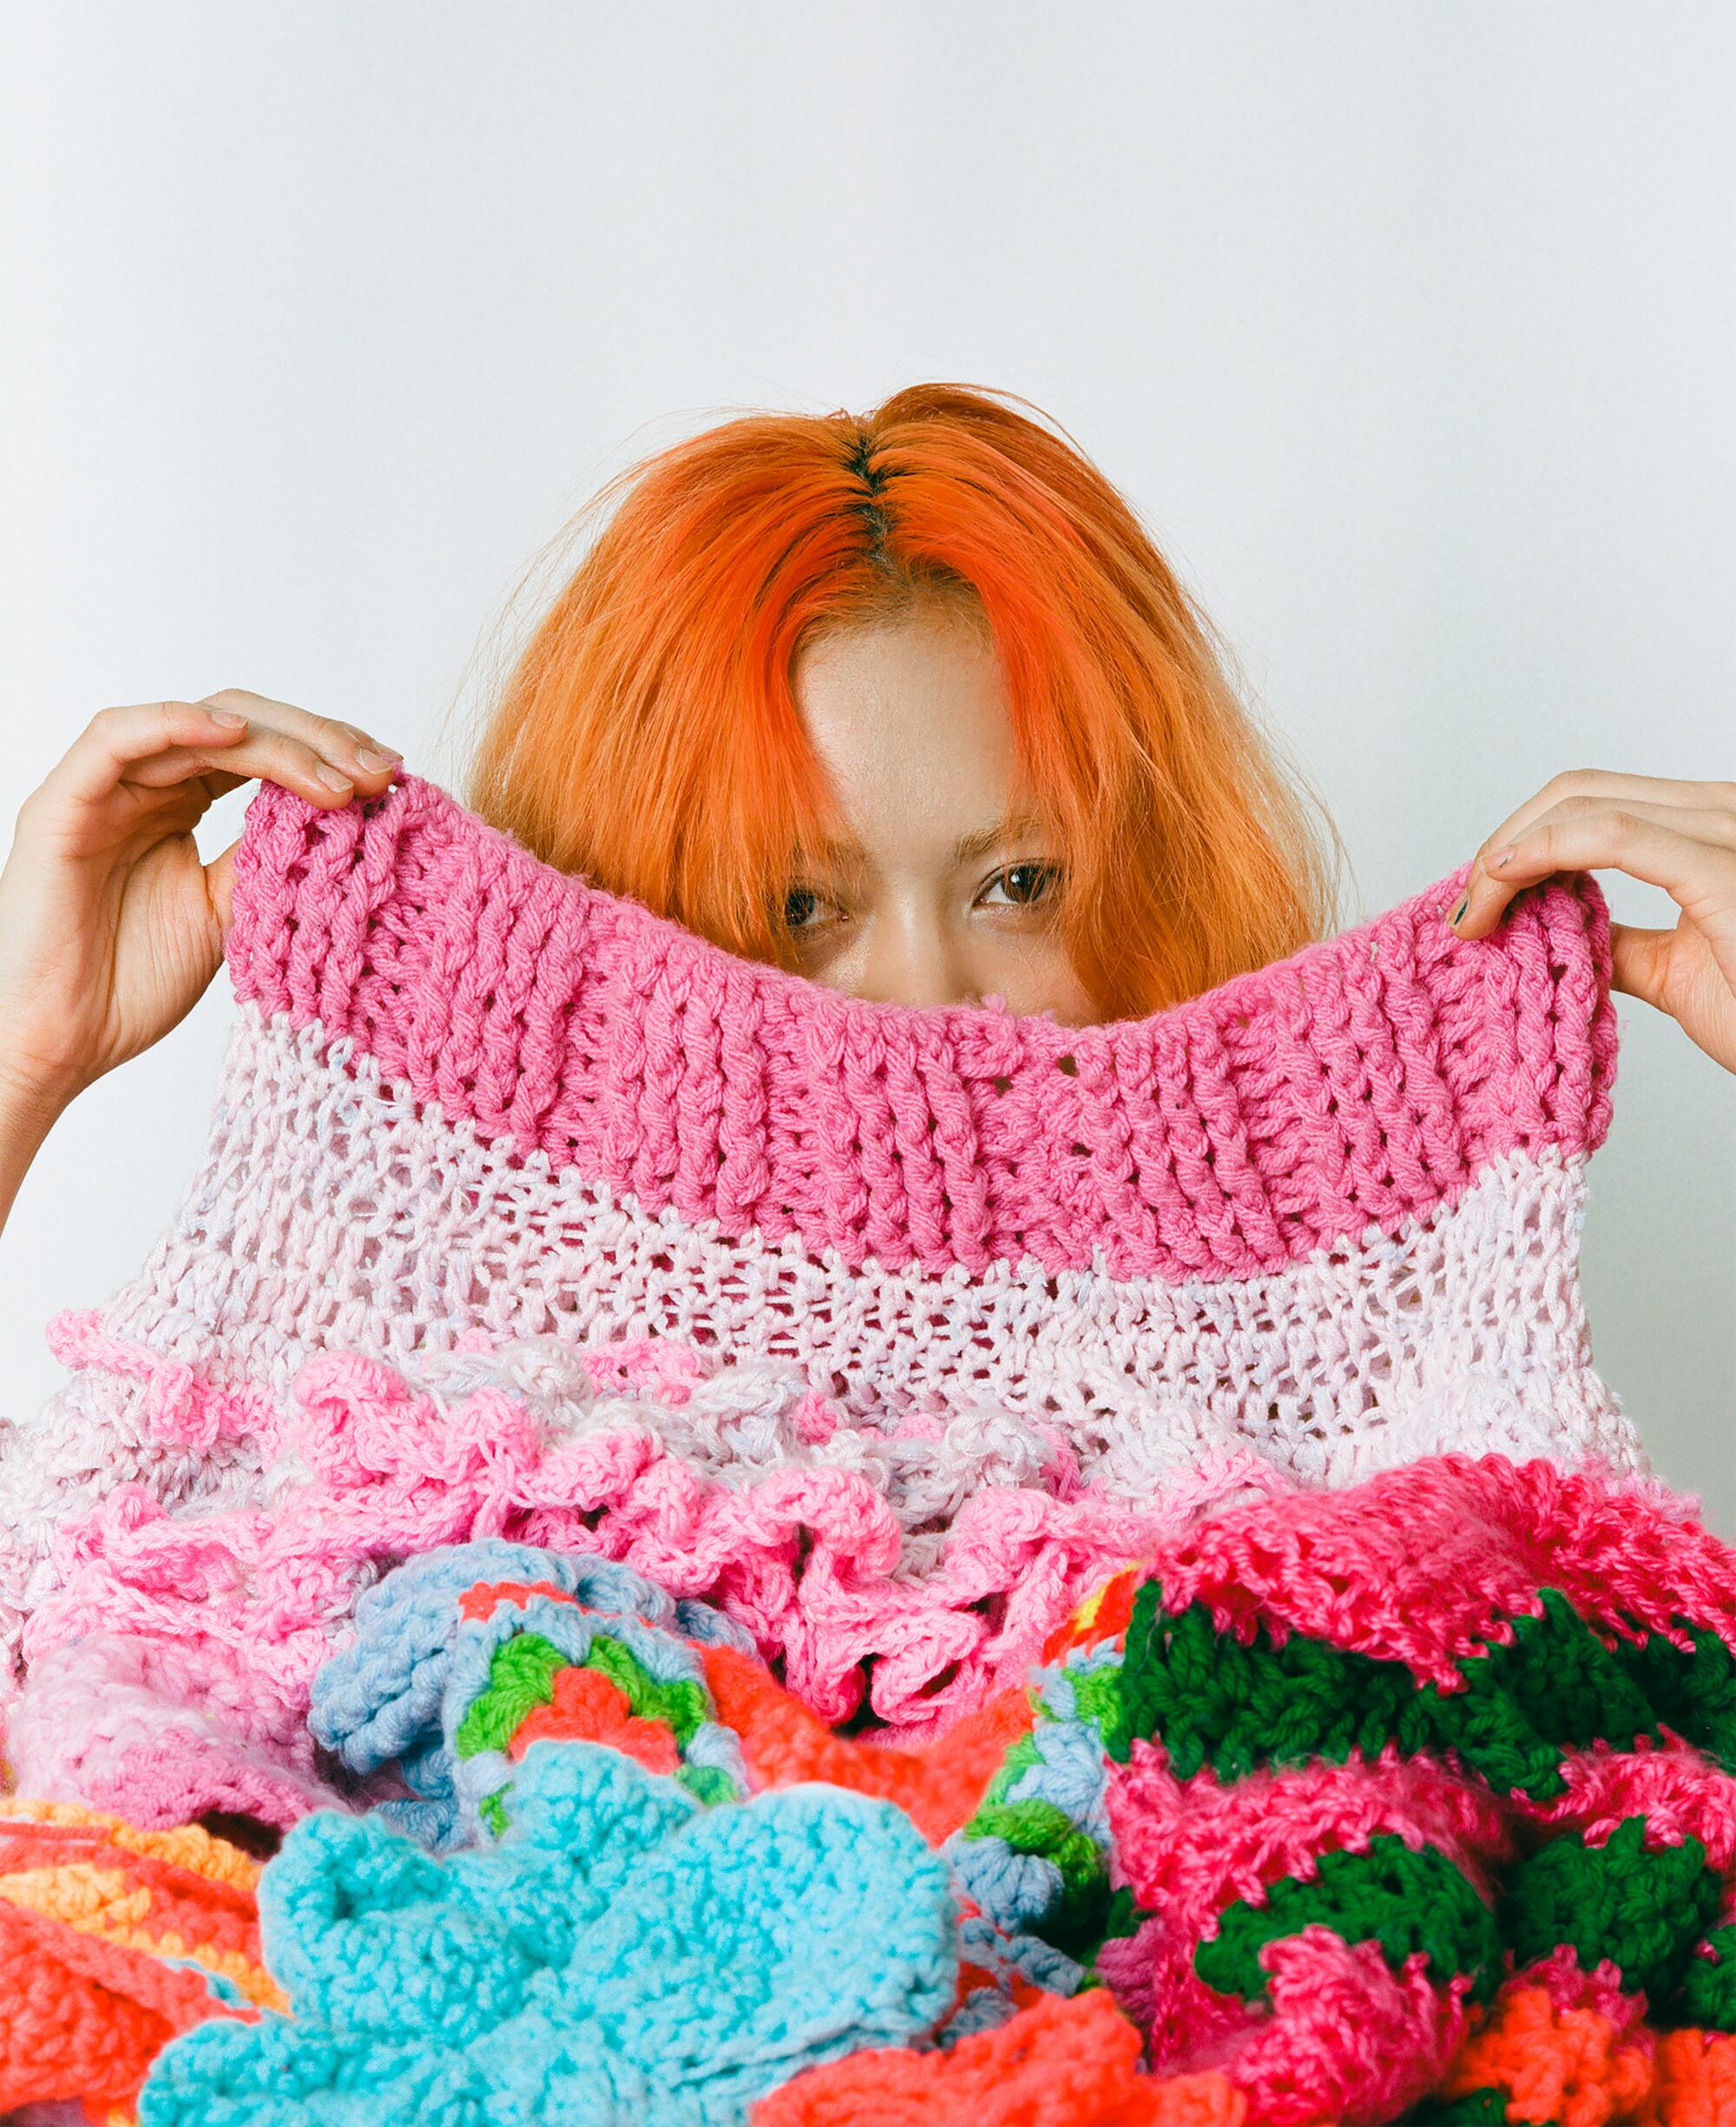 A woman holds up colorful crochet work, concealing half her face.